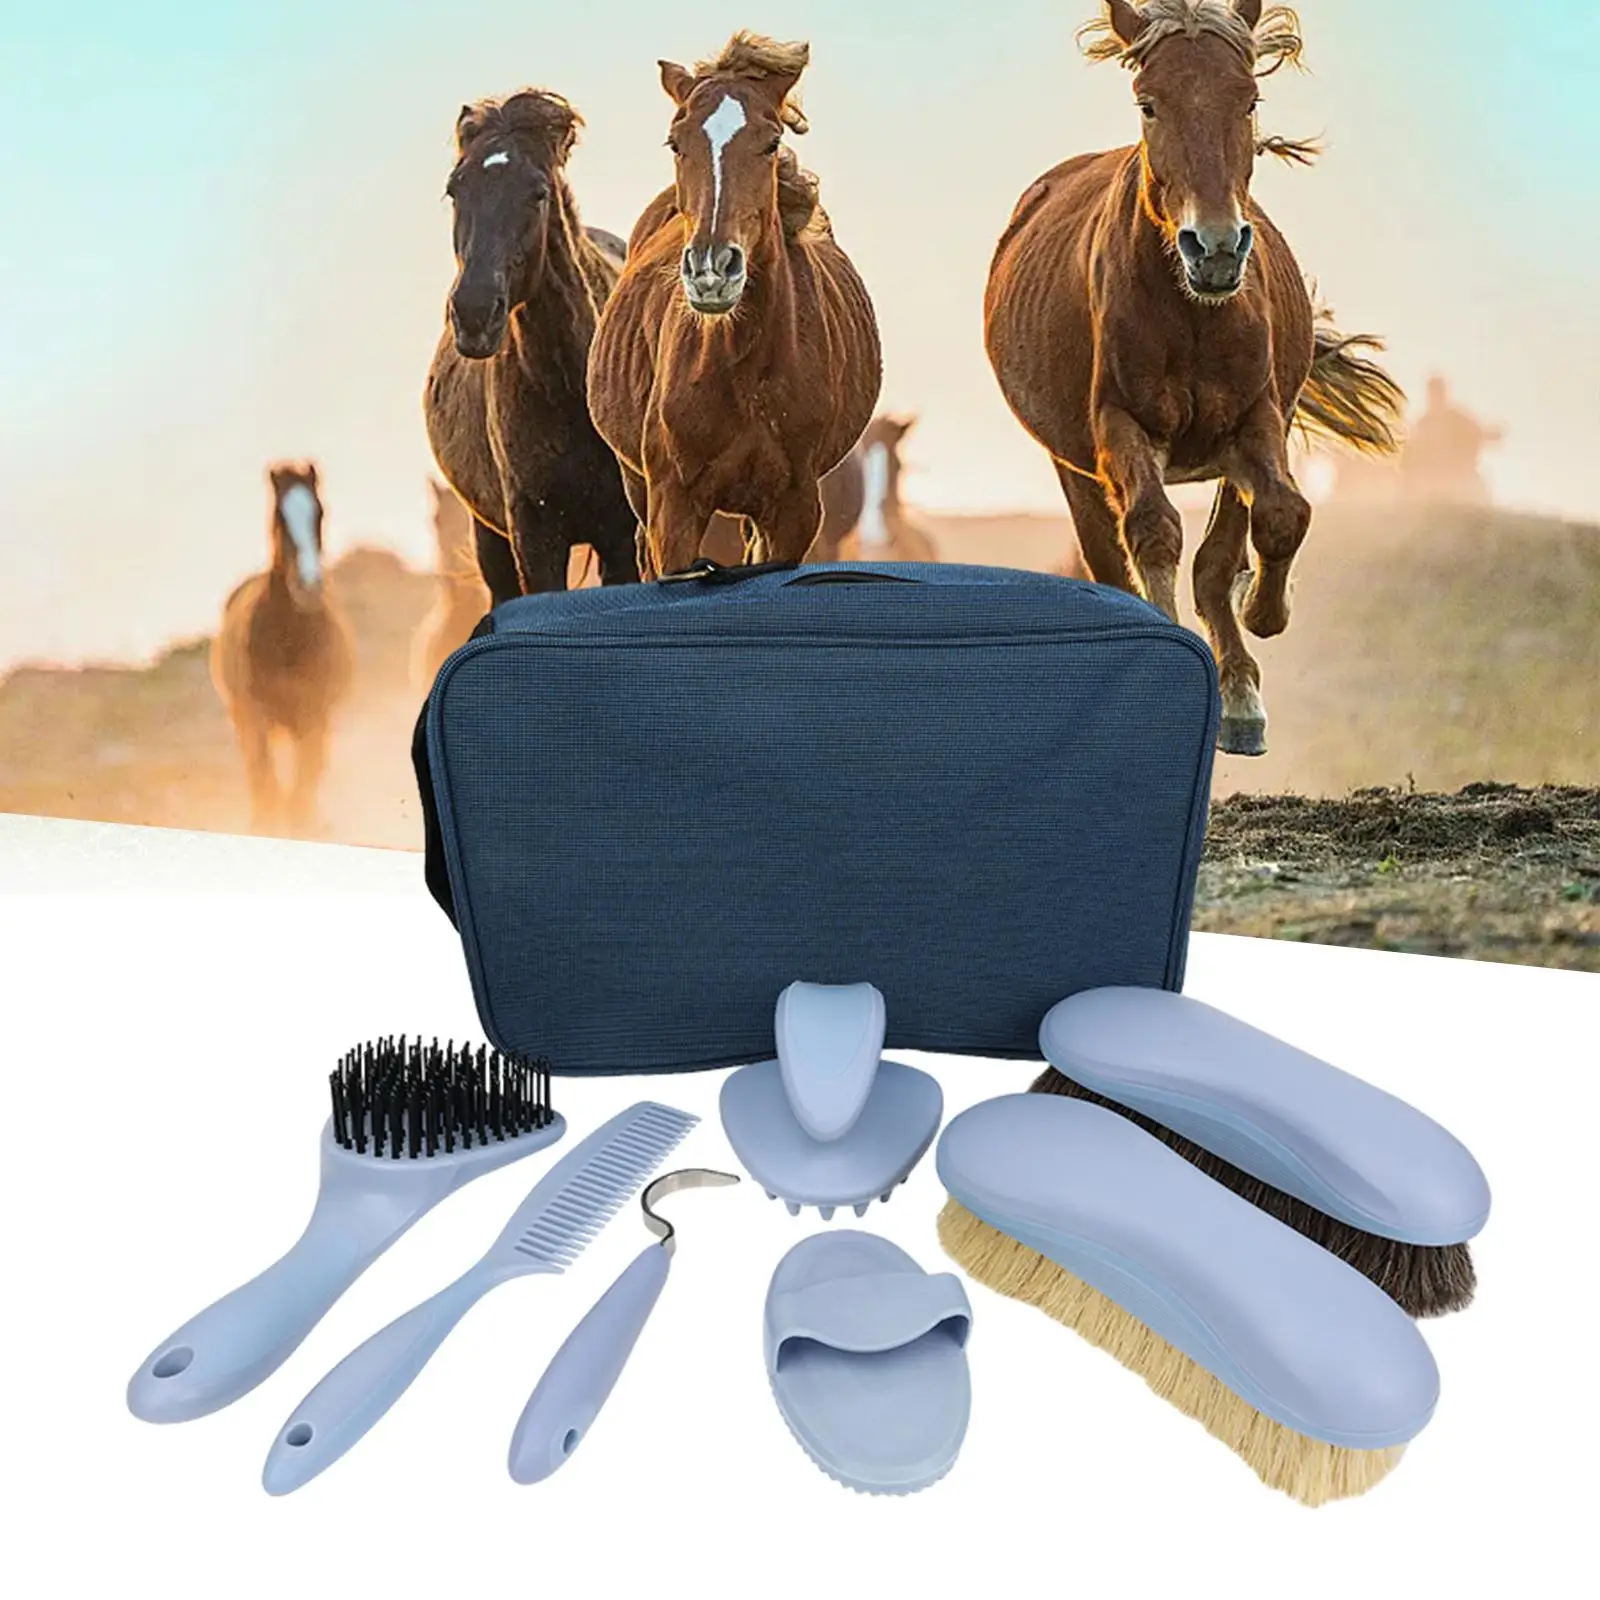 8x Horse Bathing Supplies Horse Grooming Care Kit for Adults Horse Riders